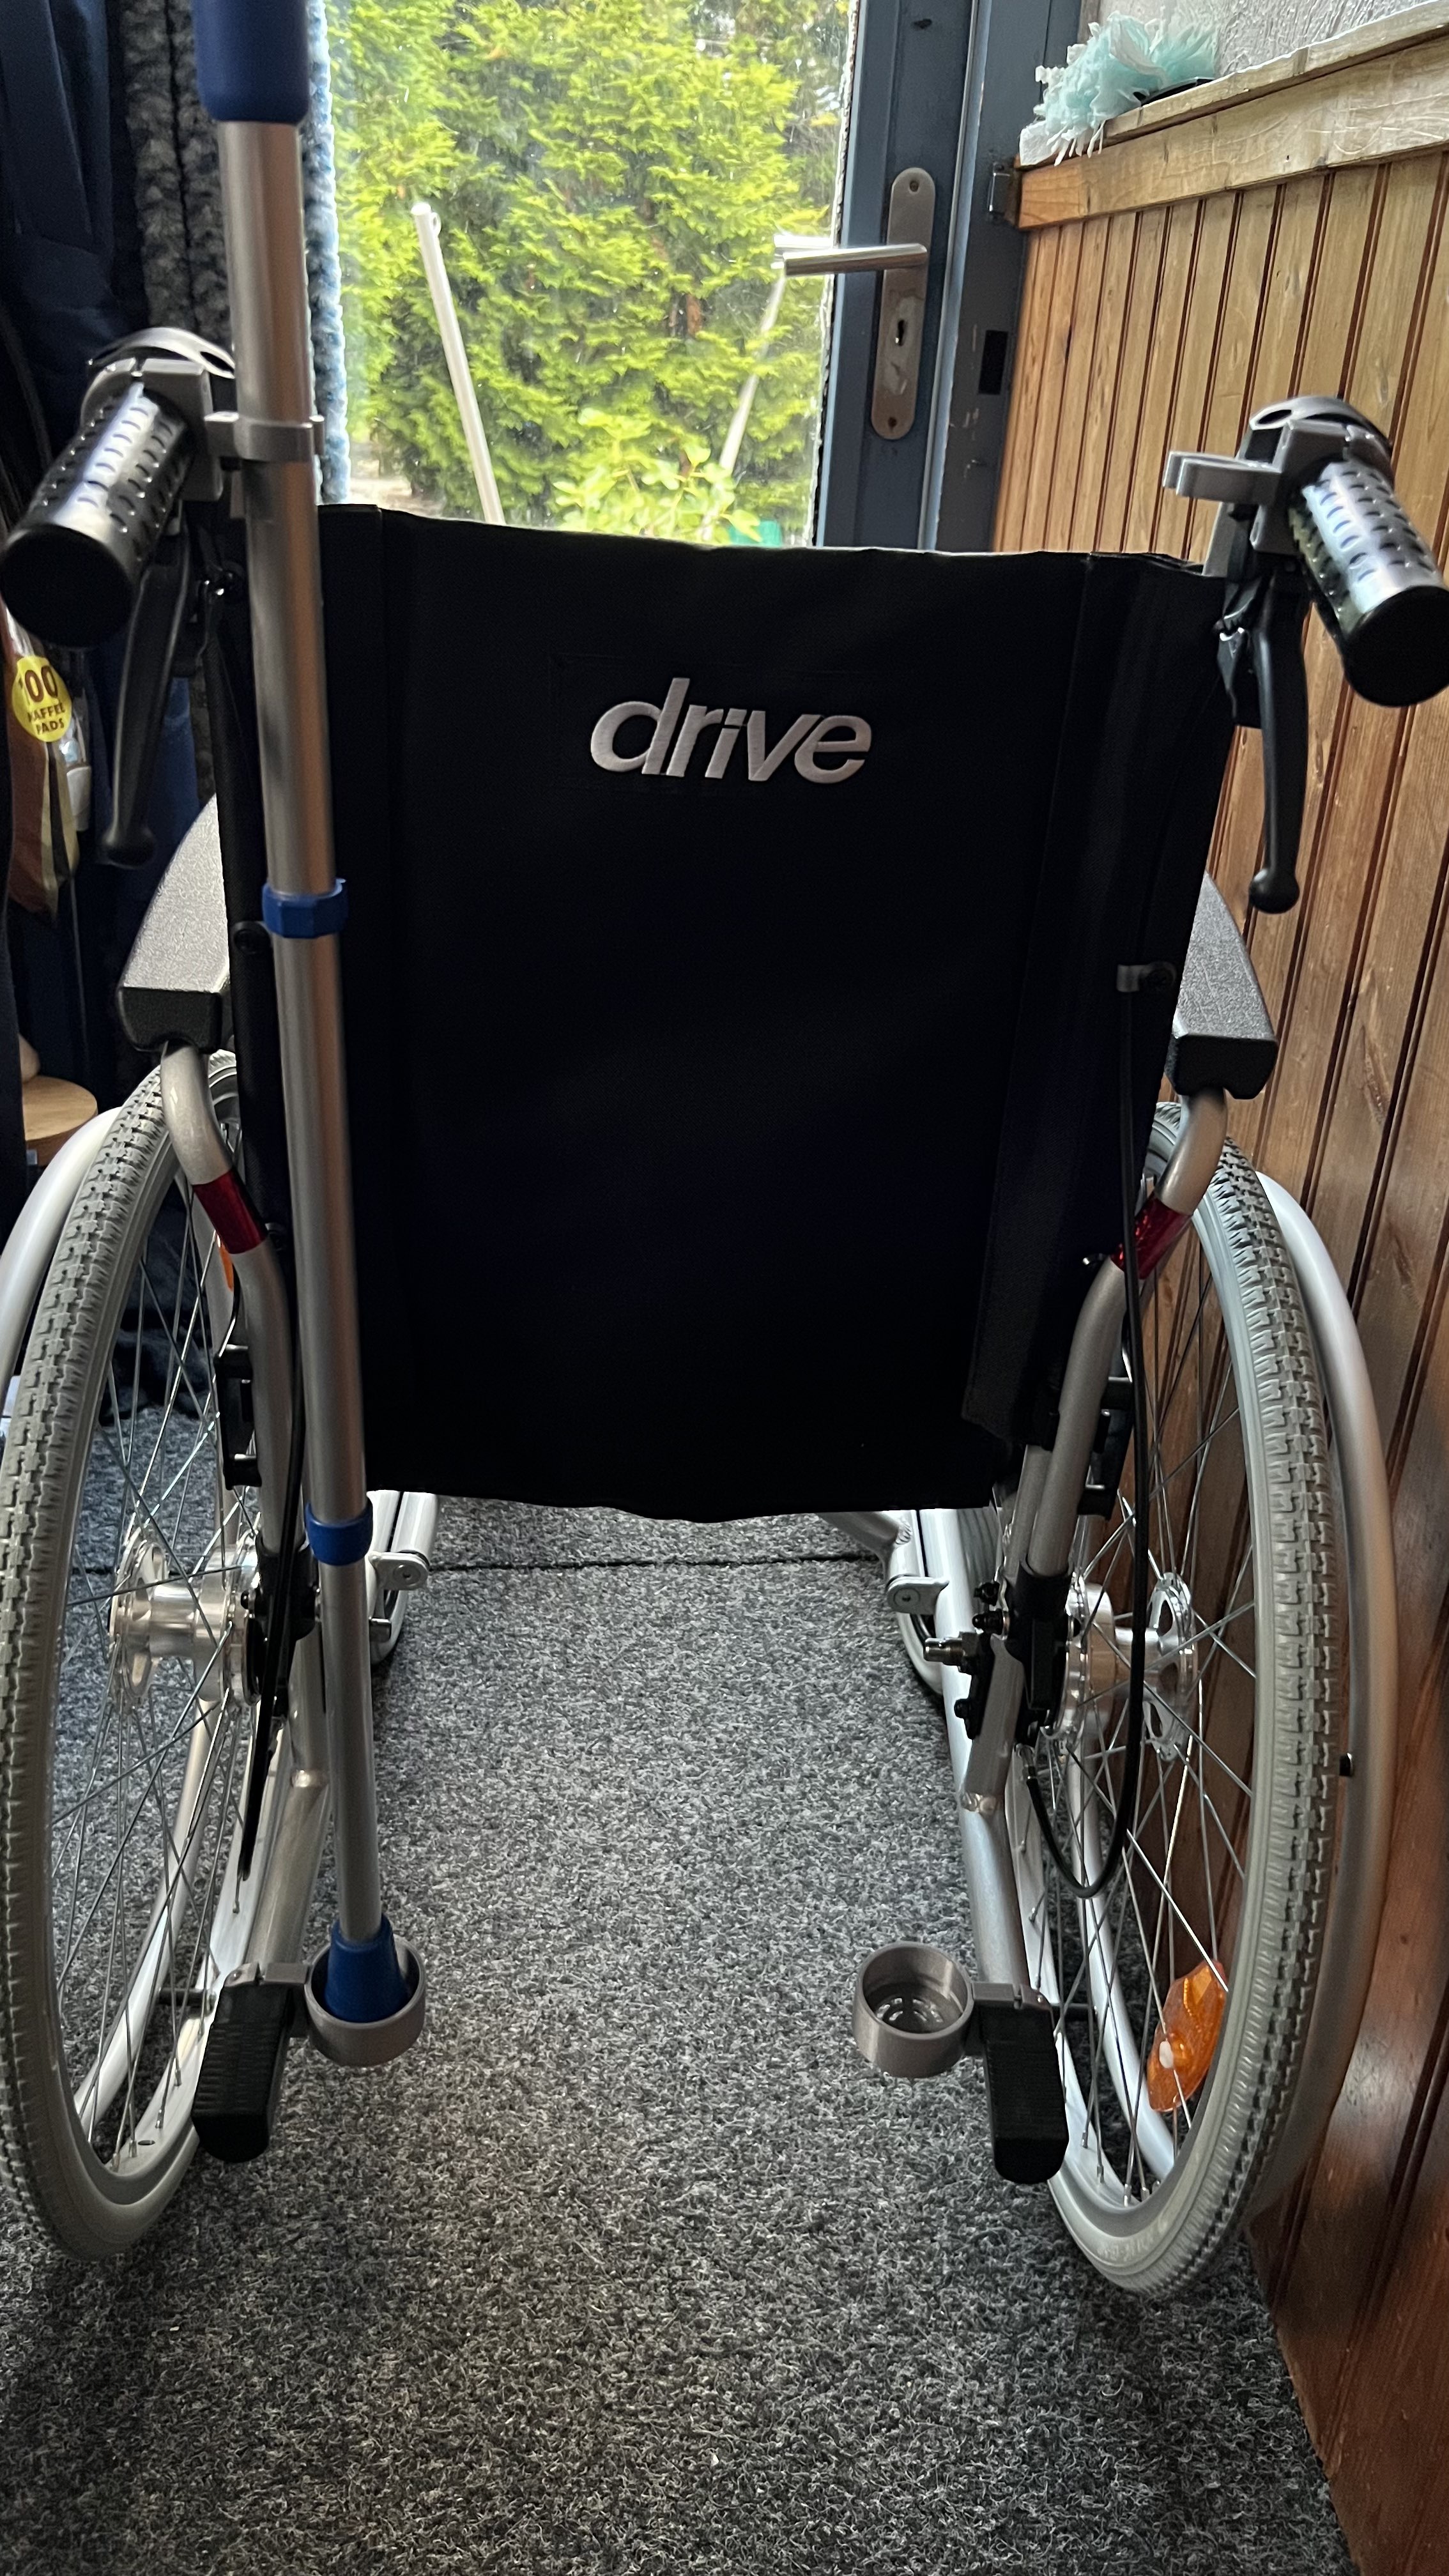 Crutches holder for wheel chair